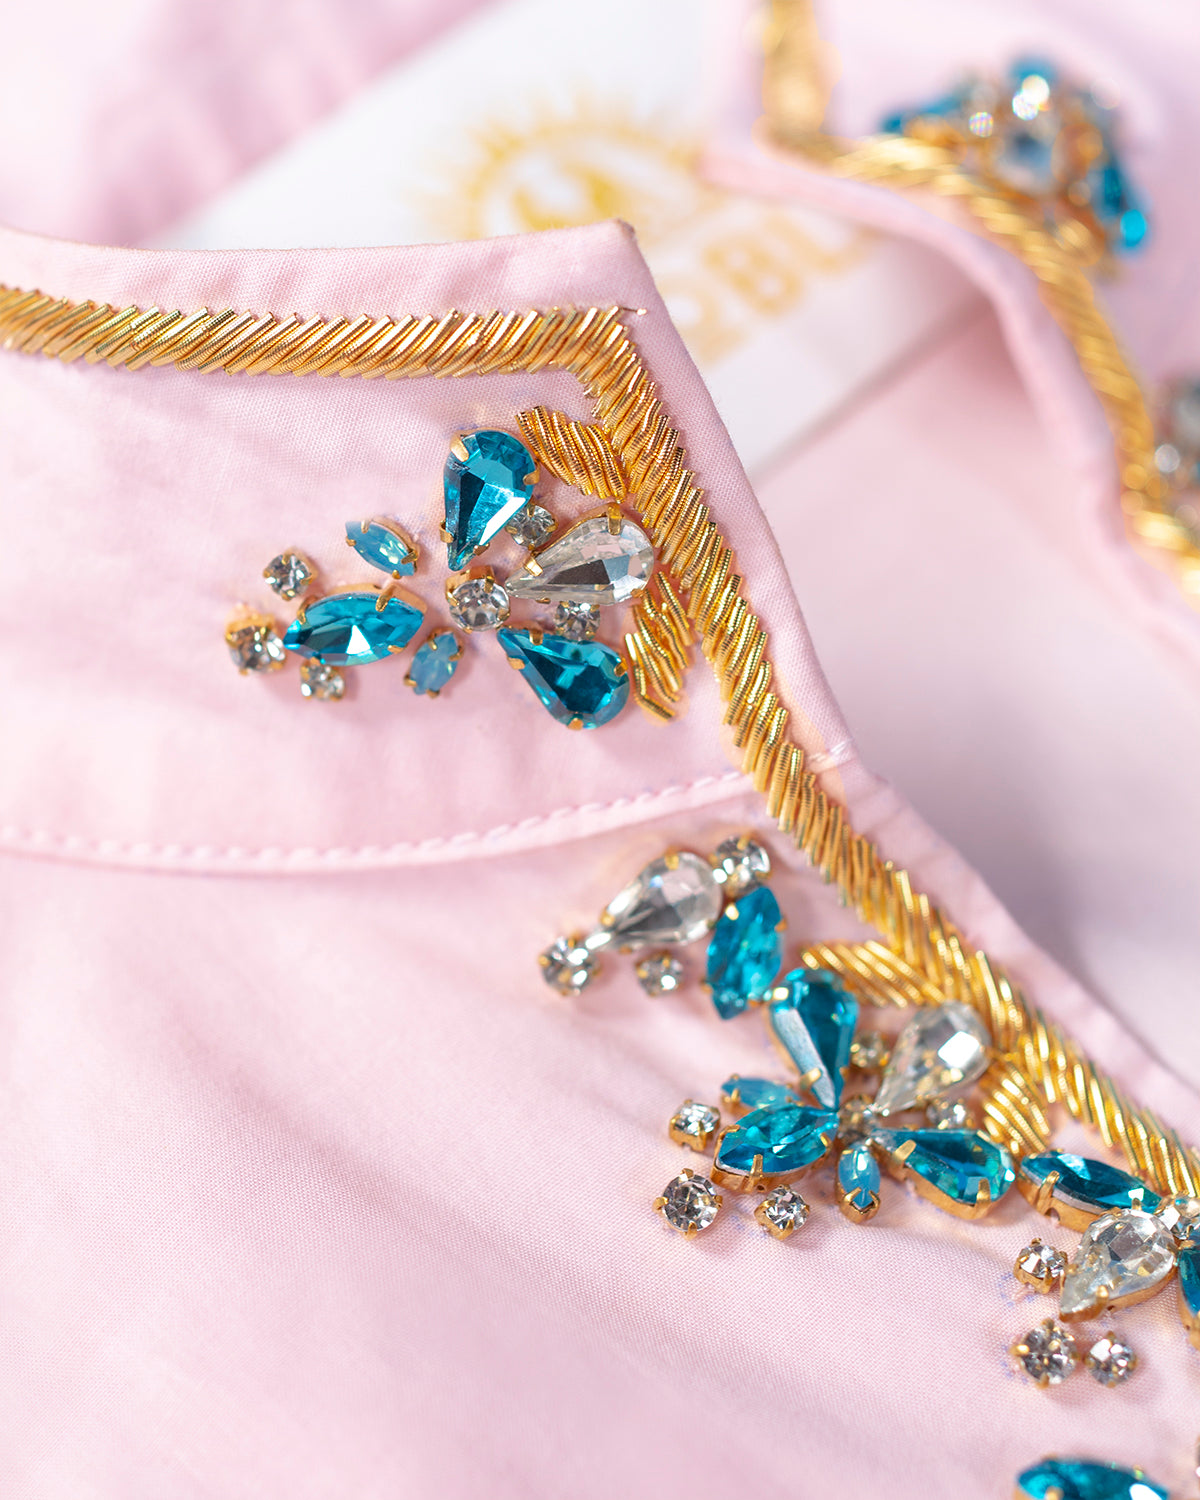 Circe Tunic in Blush Pink with Crystals and Gold Embroidery-Closeup of Crystal Jewel and Zardozi Ambellishment